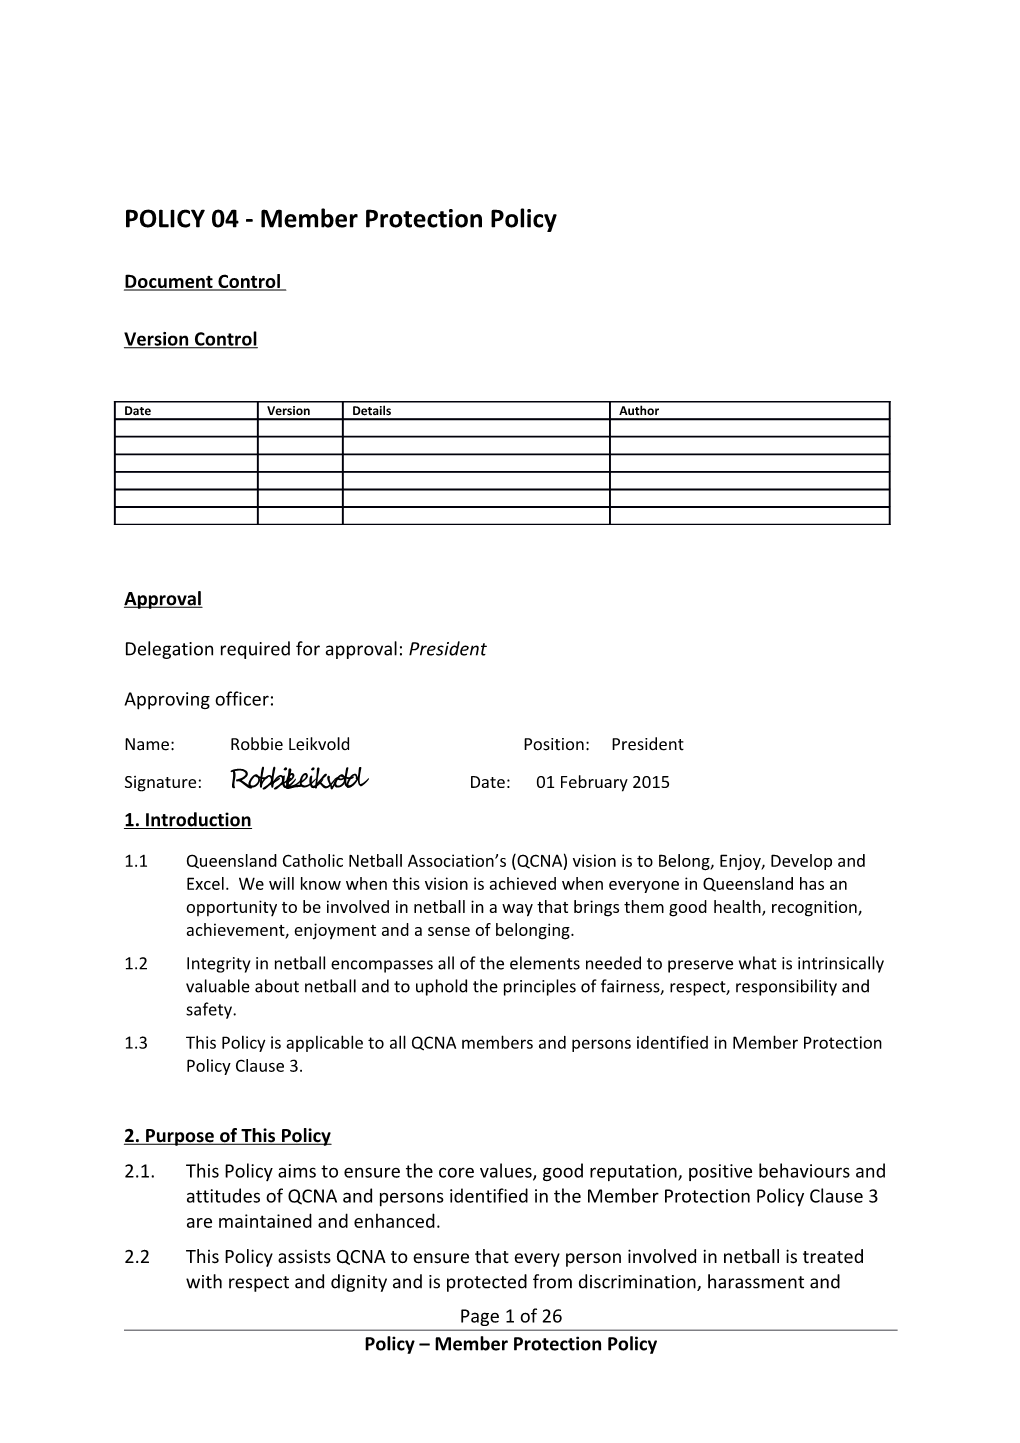 POLICY04 - Member Protection Policy